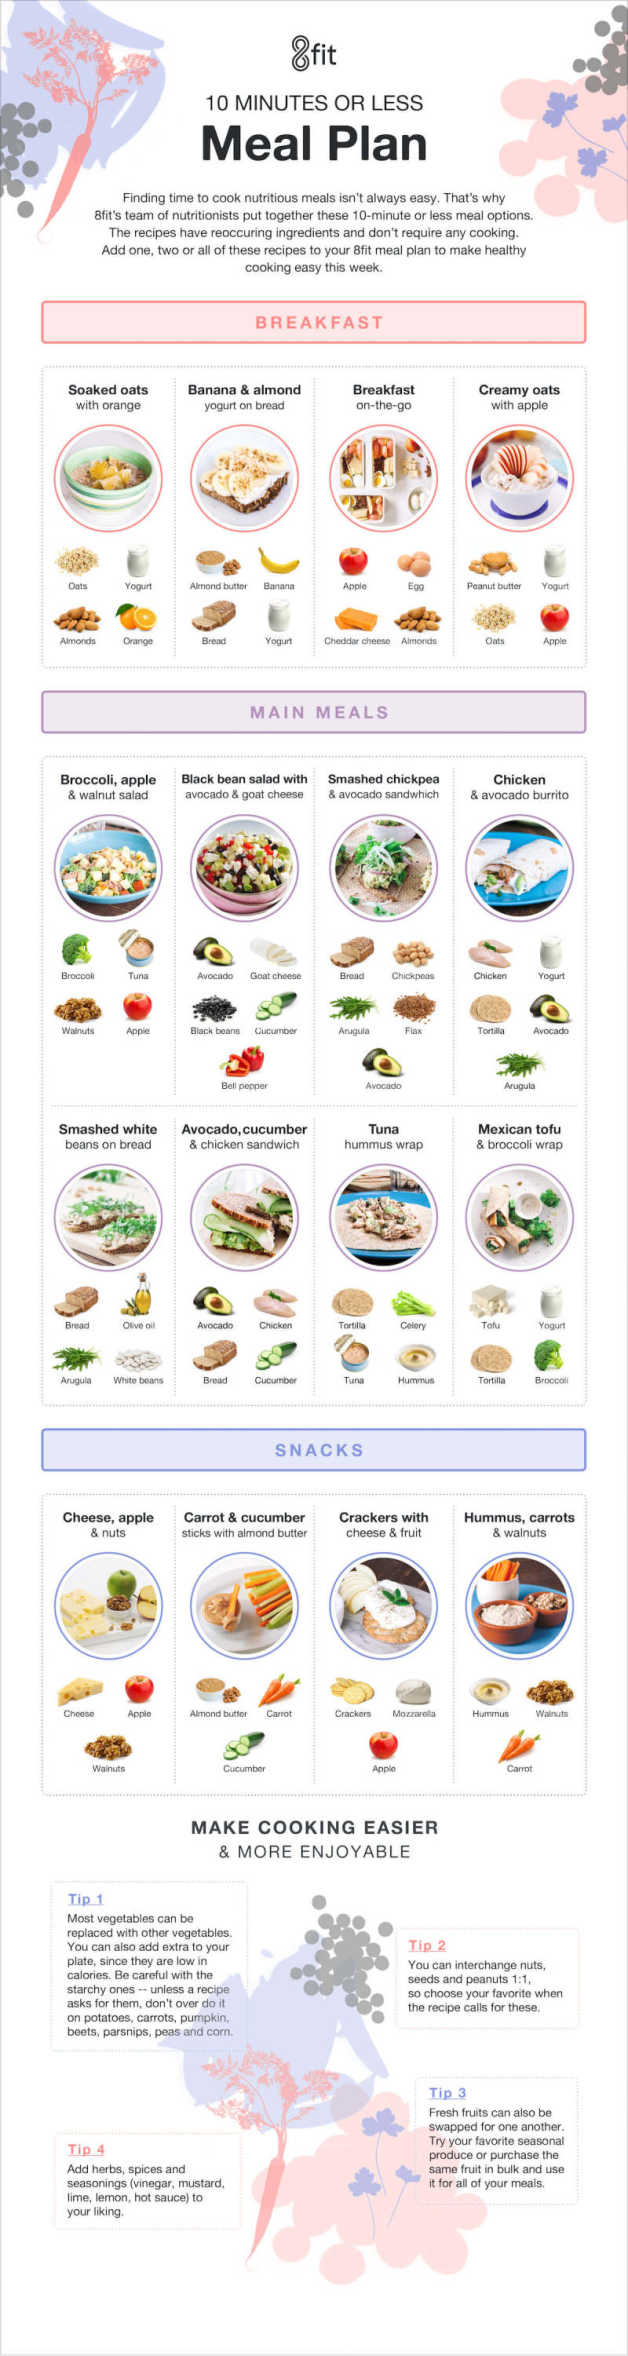 10 minutes or less meal plan infographic